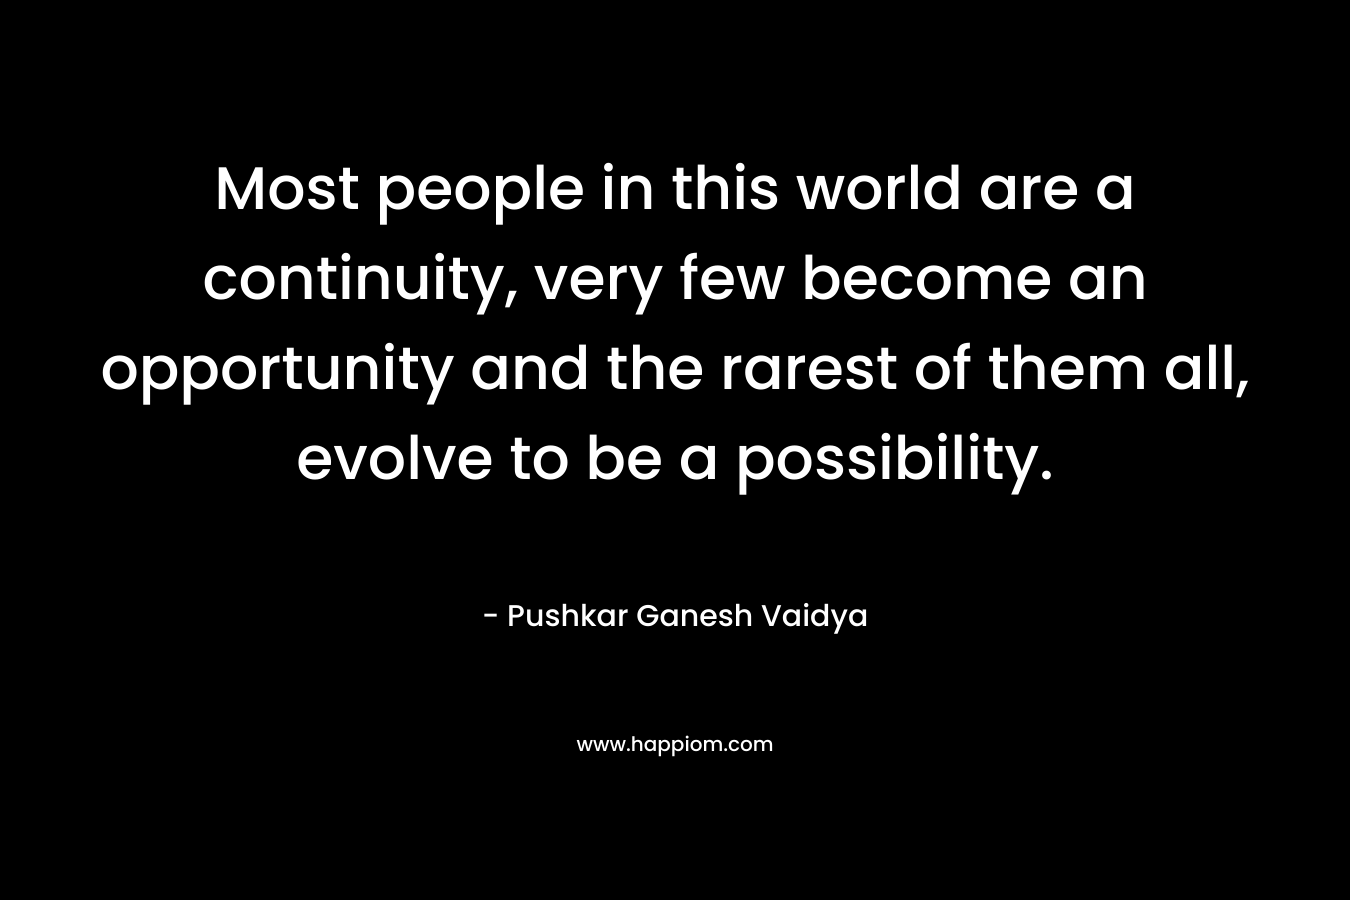 Most people in this world are a continuity, very few become an opportunity and the rarest of them all, evolve to be a possibility. – Pushkar Ganesh Vaidya